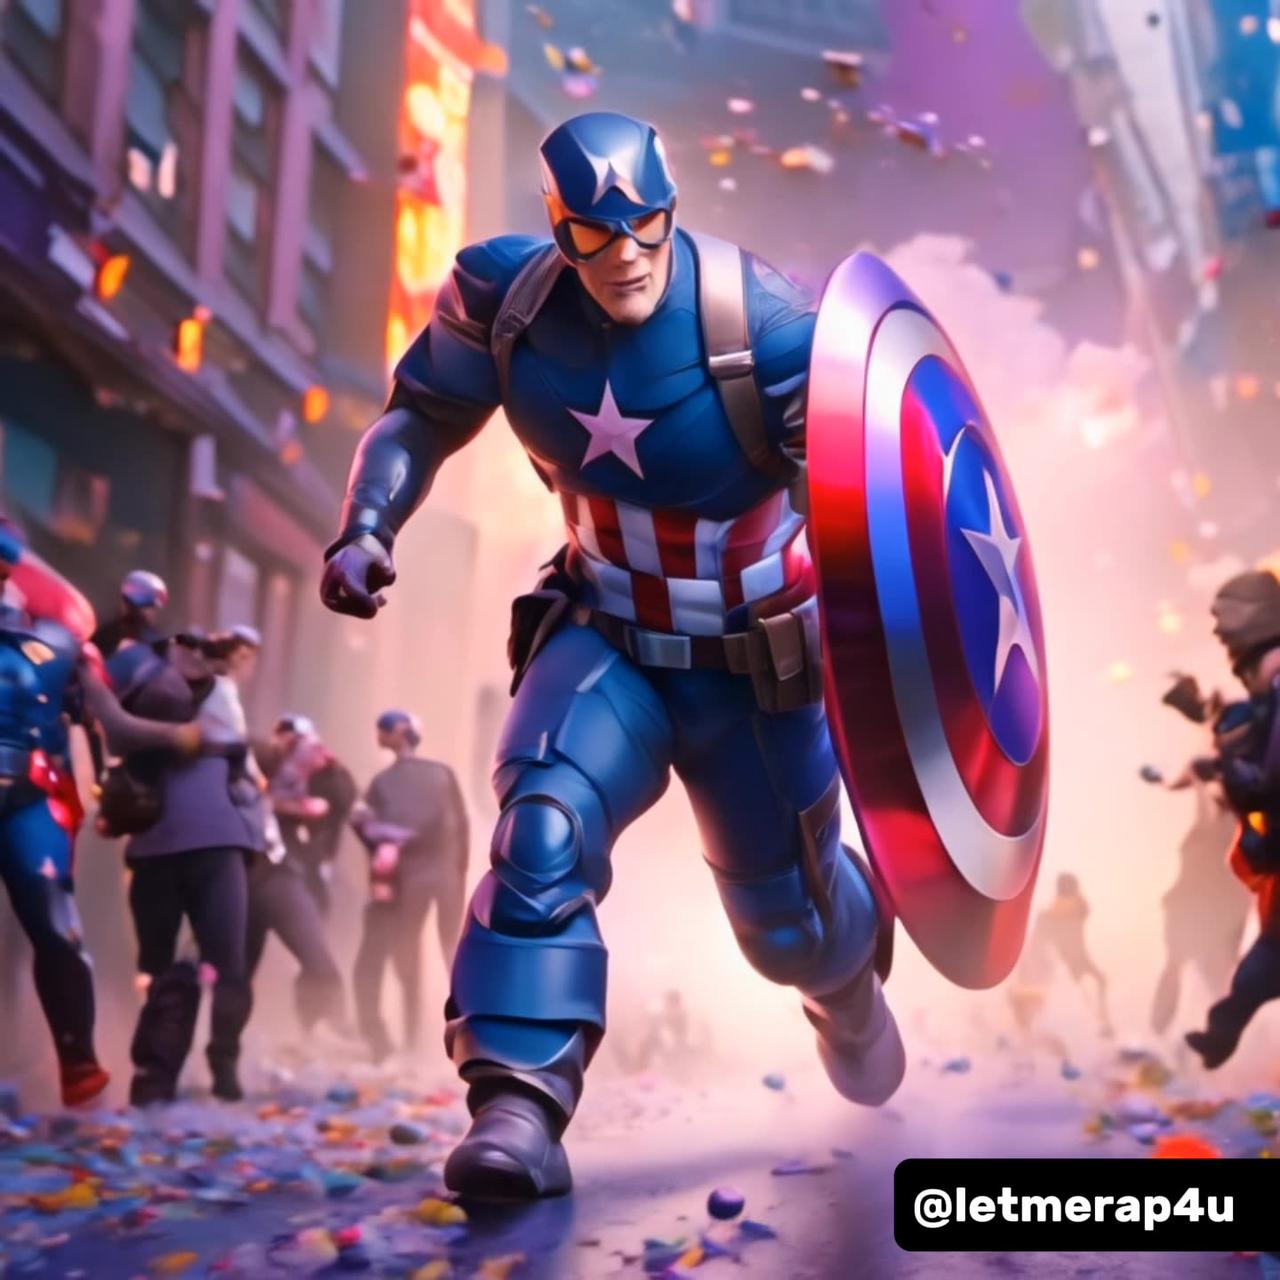 AI Generated Video of Captain America saving the people in the colourful street